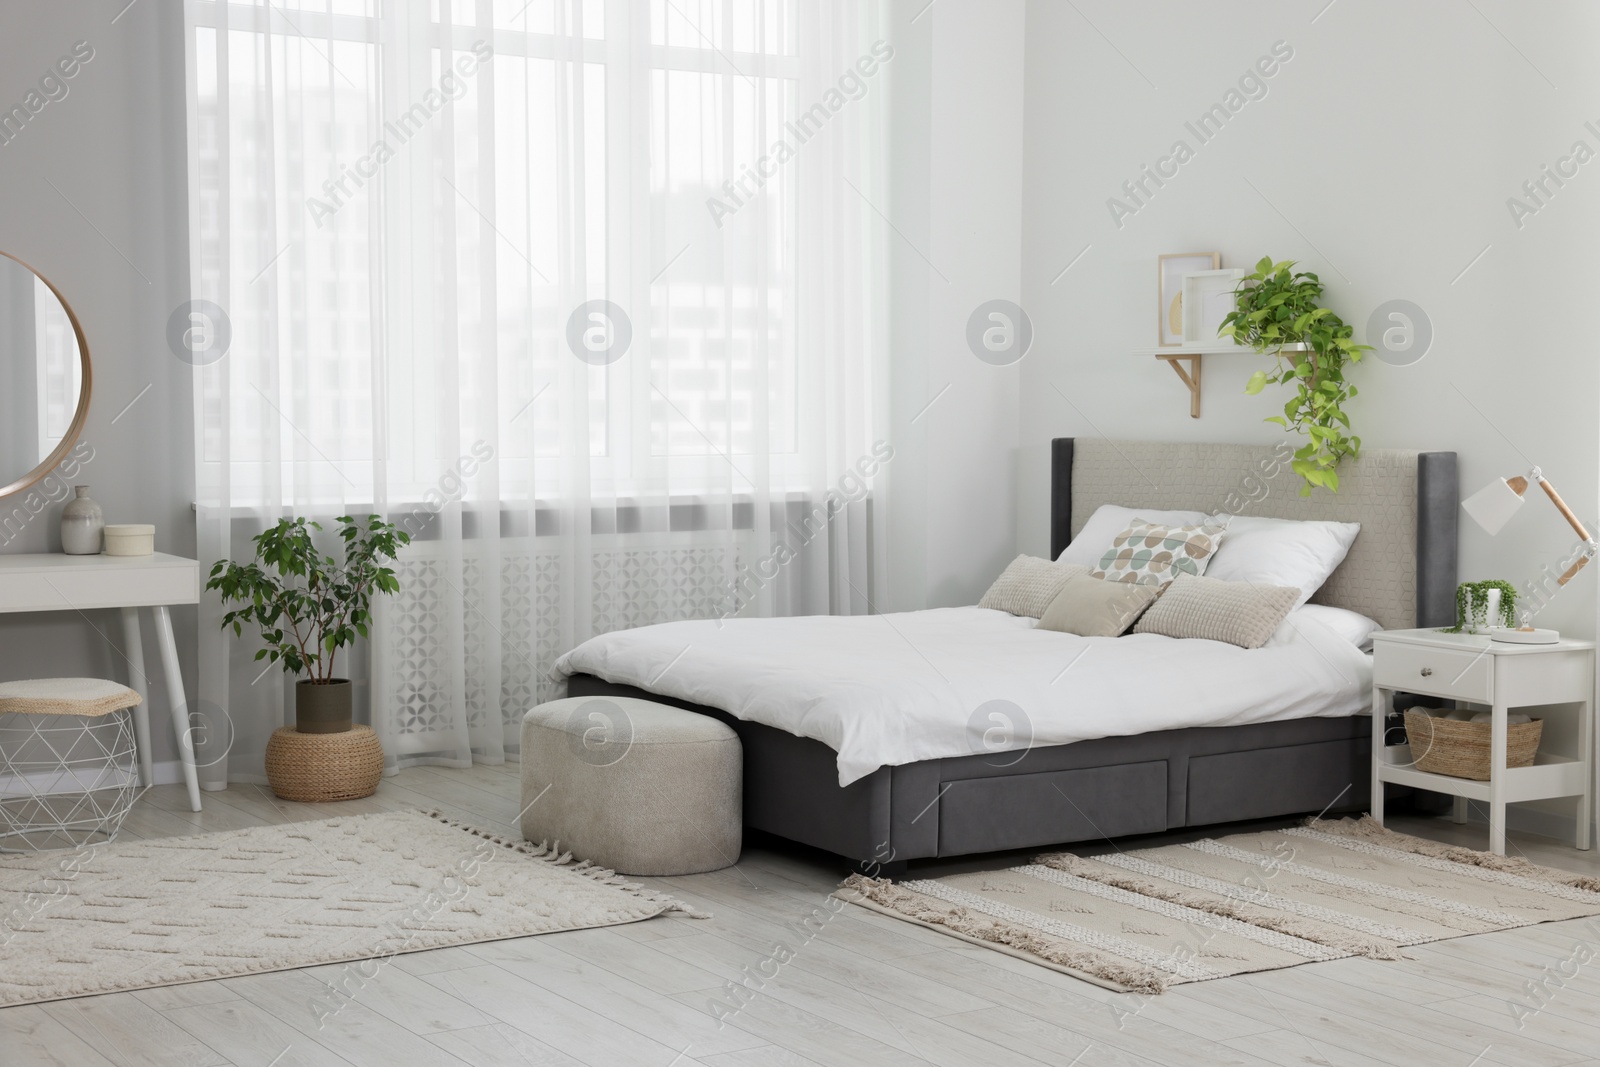 Photo of Stylish bedroom interior with large comfortable bed and ottoman near window